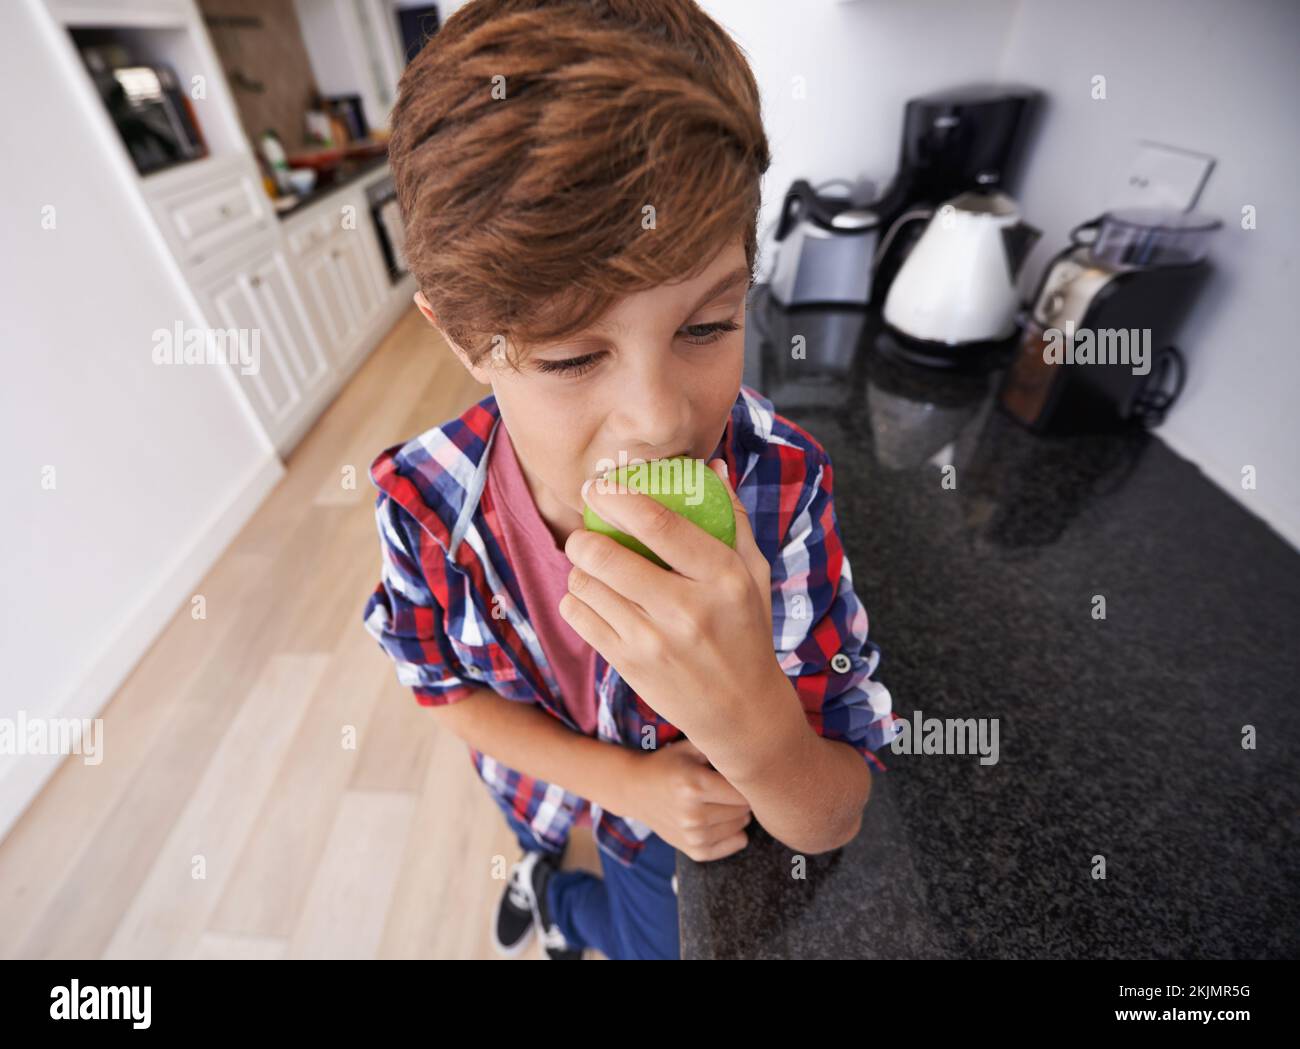 Healthy snacking recommended by Mom. a young boy biting into an apple. Stock Photo